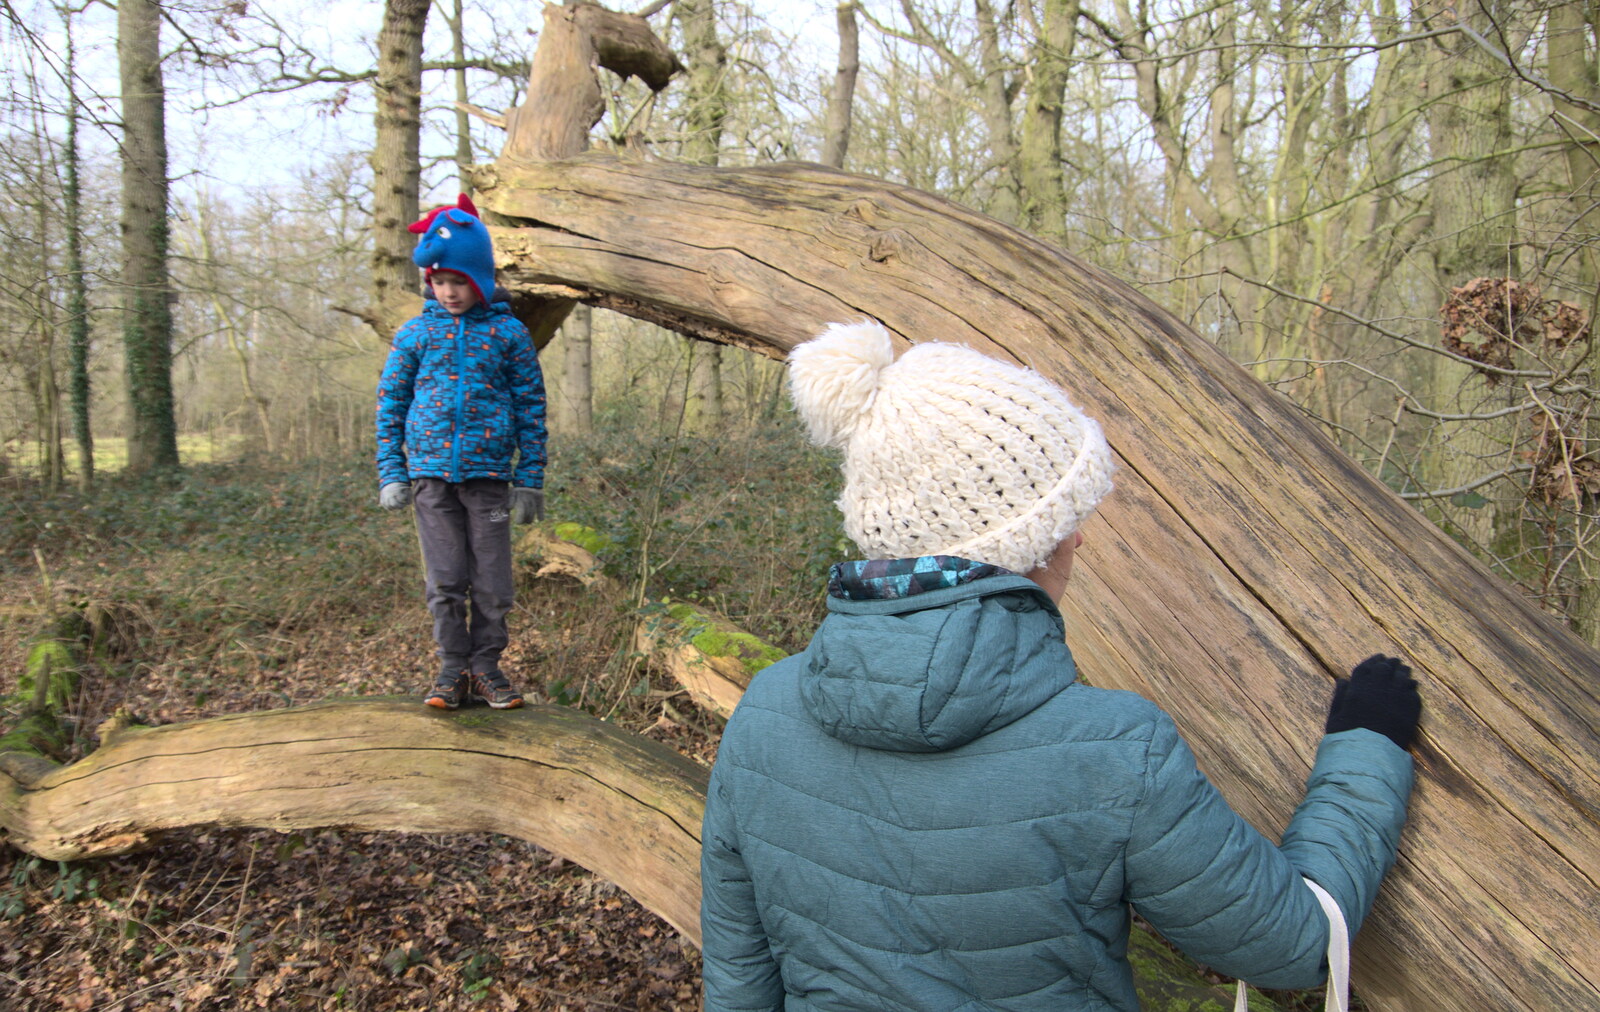 Isobel strokes a tree from A Return to Thornham Walks, Suffolk - 4th February 2018